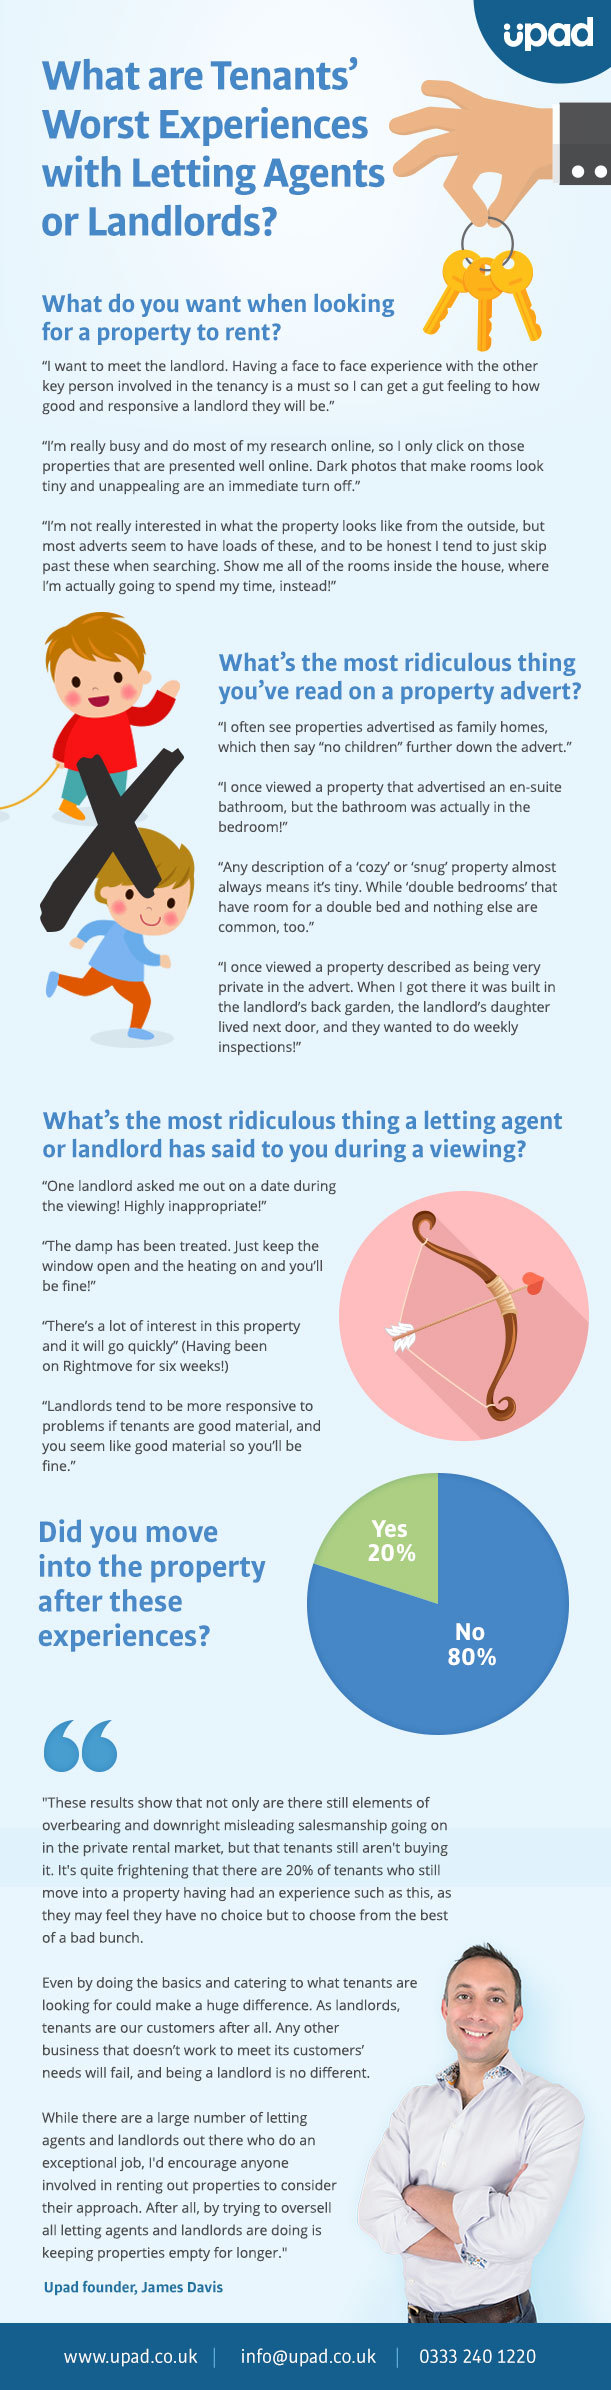 infographic what are tenants worst experiences with letting agents and landlords